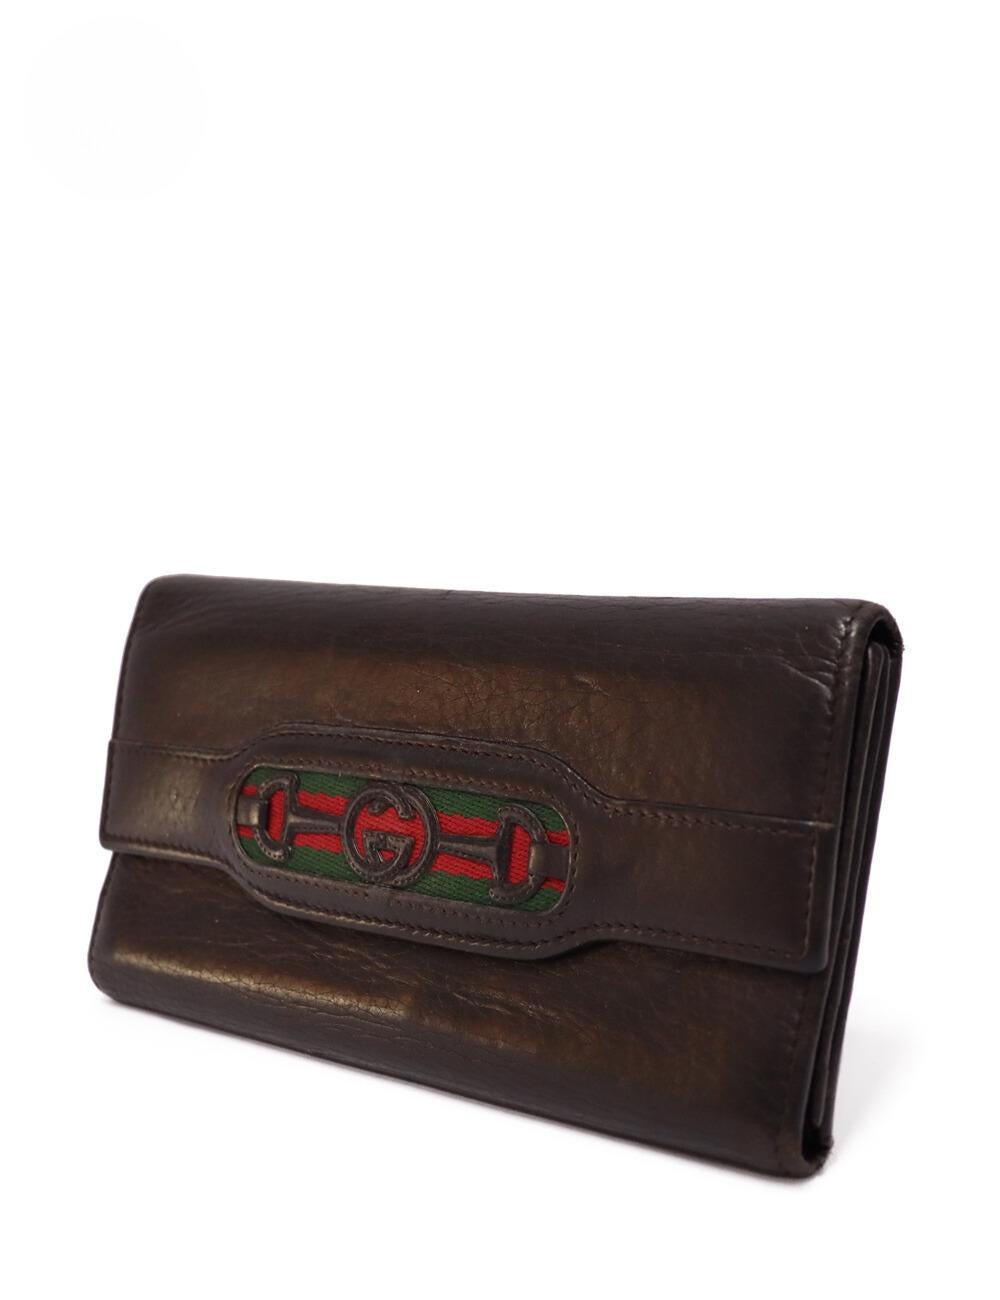 Gucci Brown Leather Striped Logo Wallet , features twelve card pockets, three slip, and one photo pocket.

Material: Leather
Height: 10cm
Width: 19cm
Depth: 2cm
Overall condition: Good
Interior condition: Signs of use
External condition: Leather